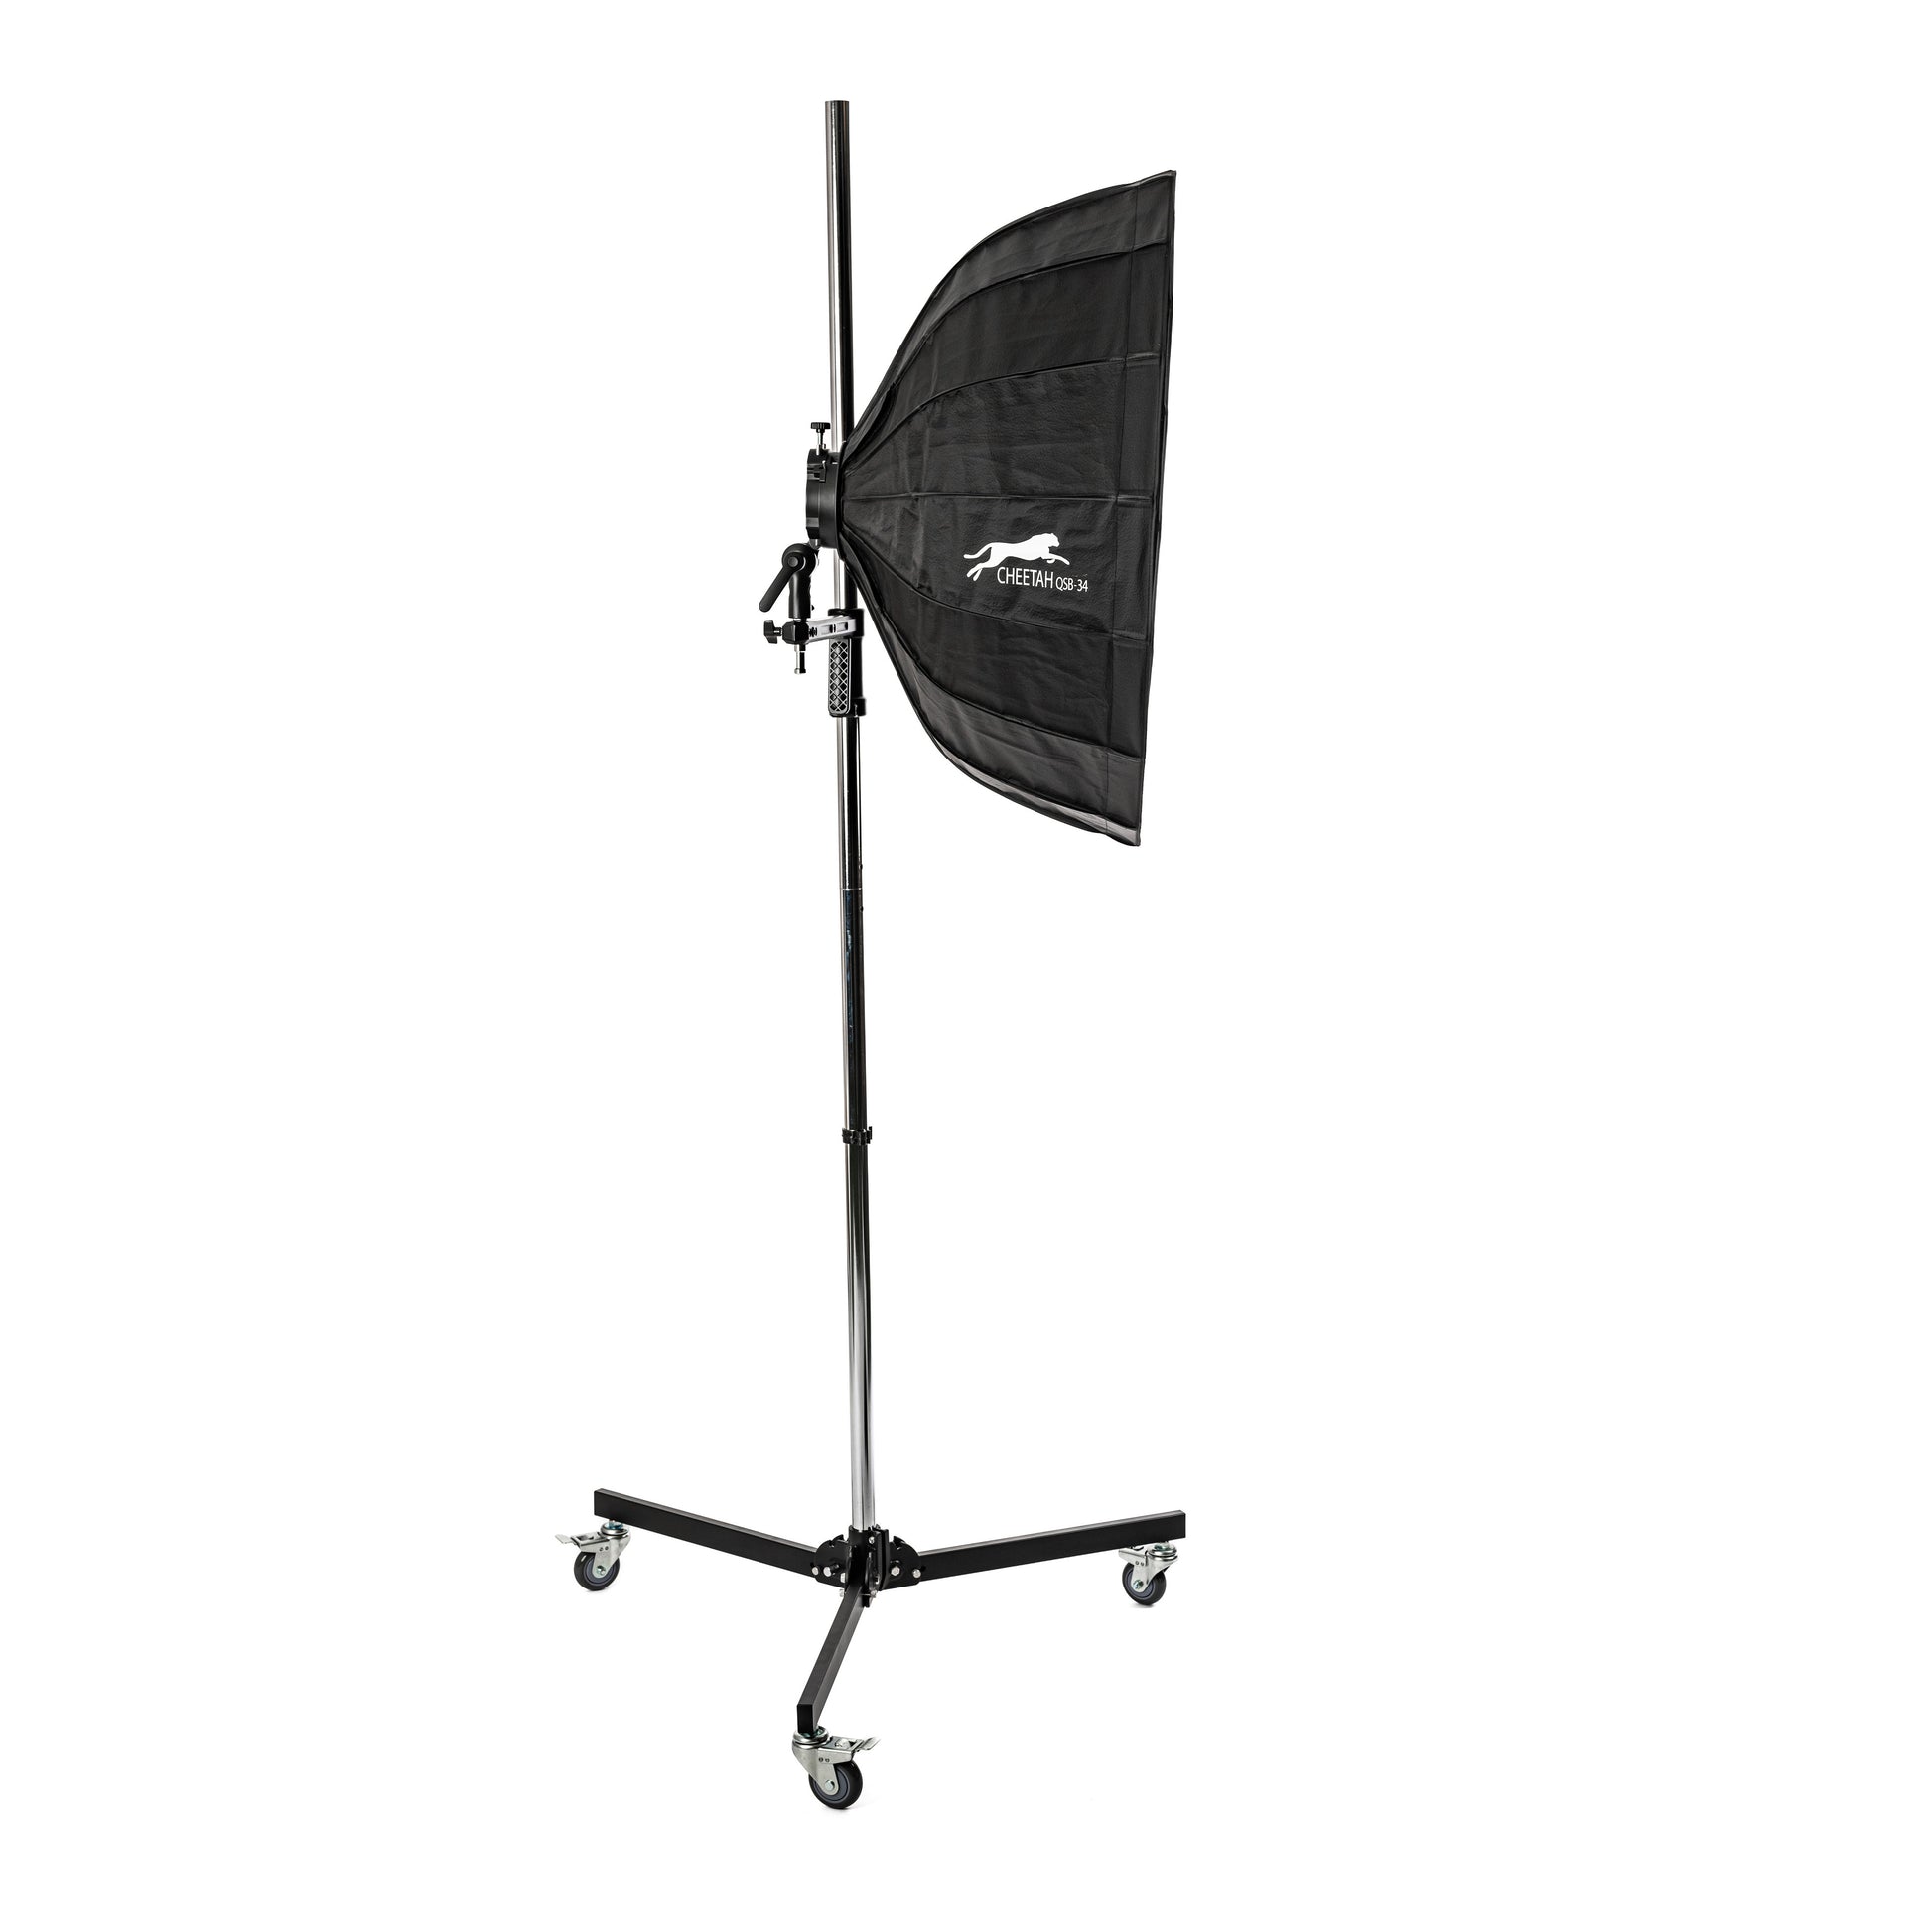 Cheetahstand Dual Pistol Grip Stand With QSB-34 Softbox Mounted